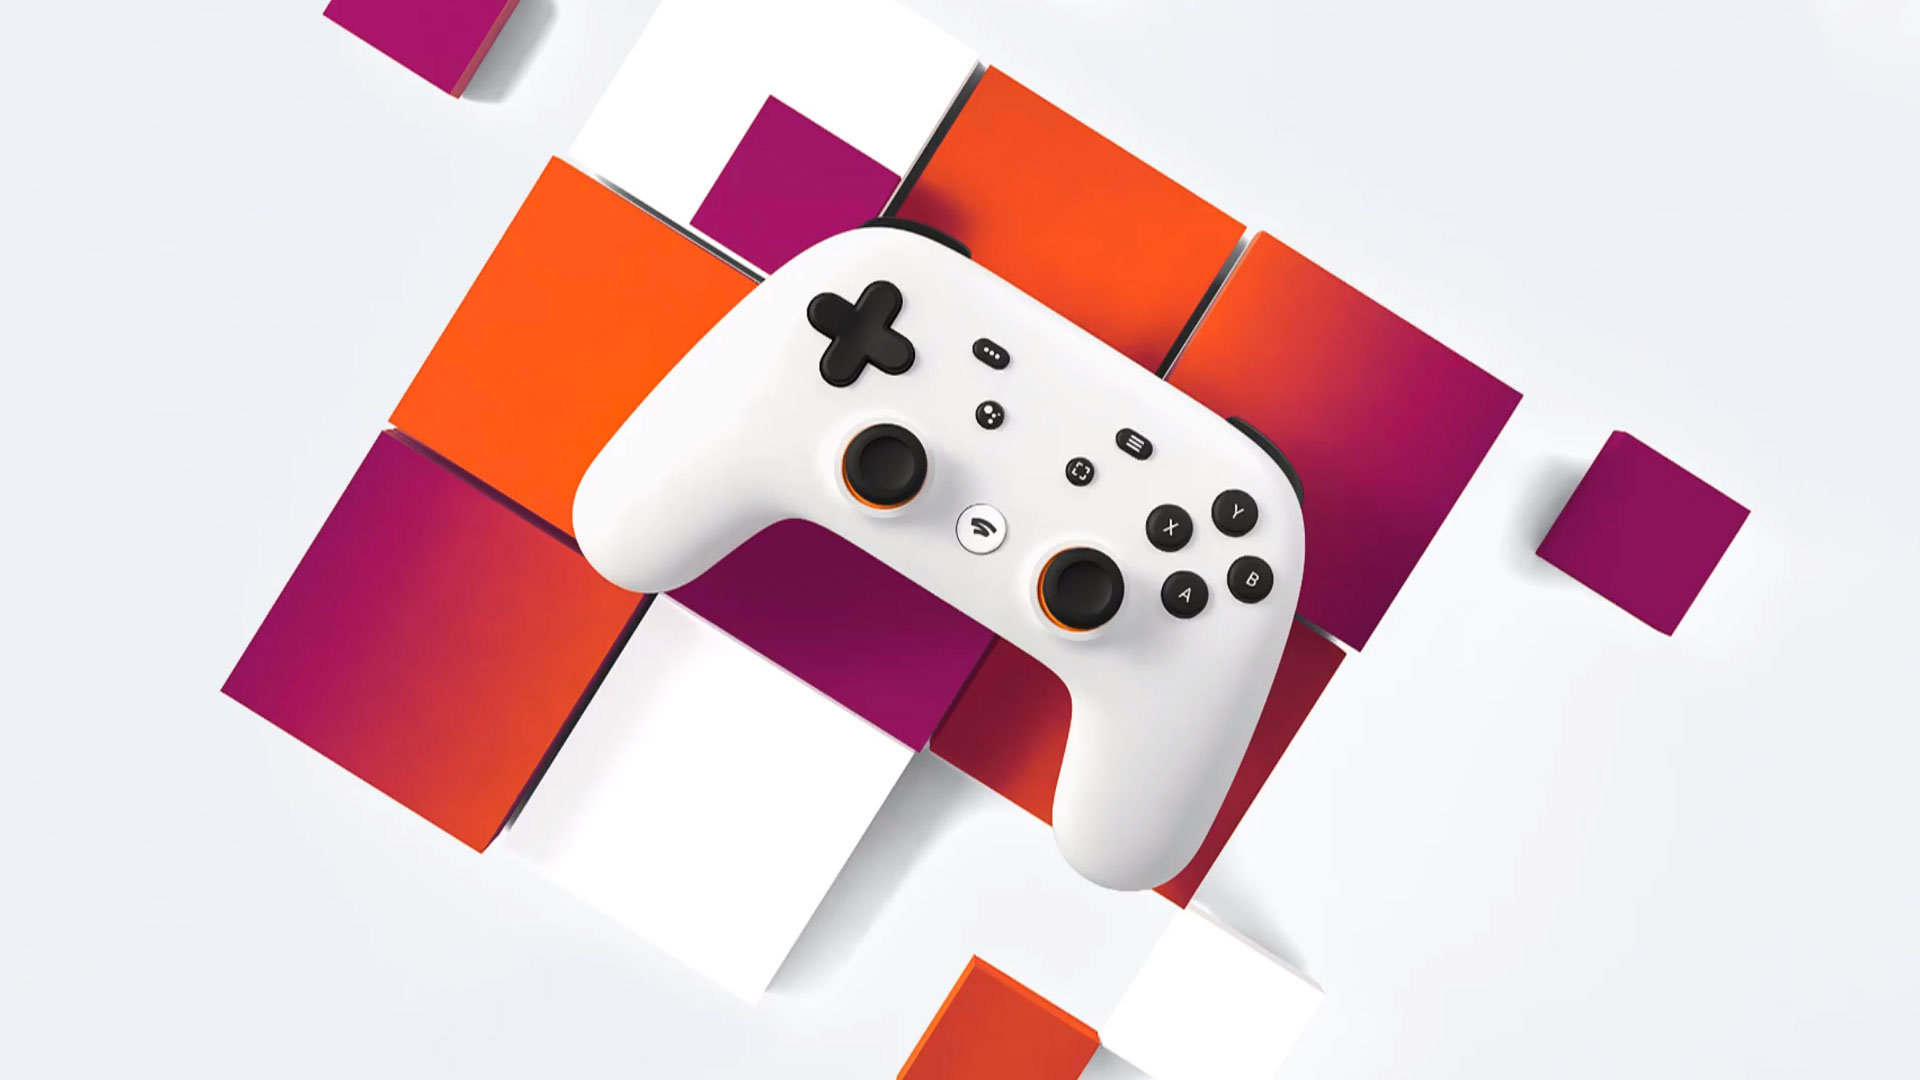 Far Cry 6 Stadia pre-orders are now open, more - 9to5Google